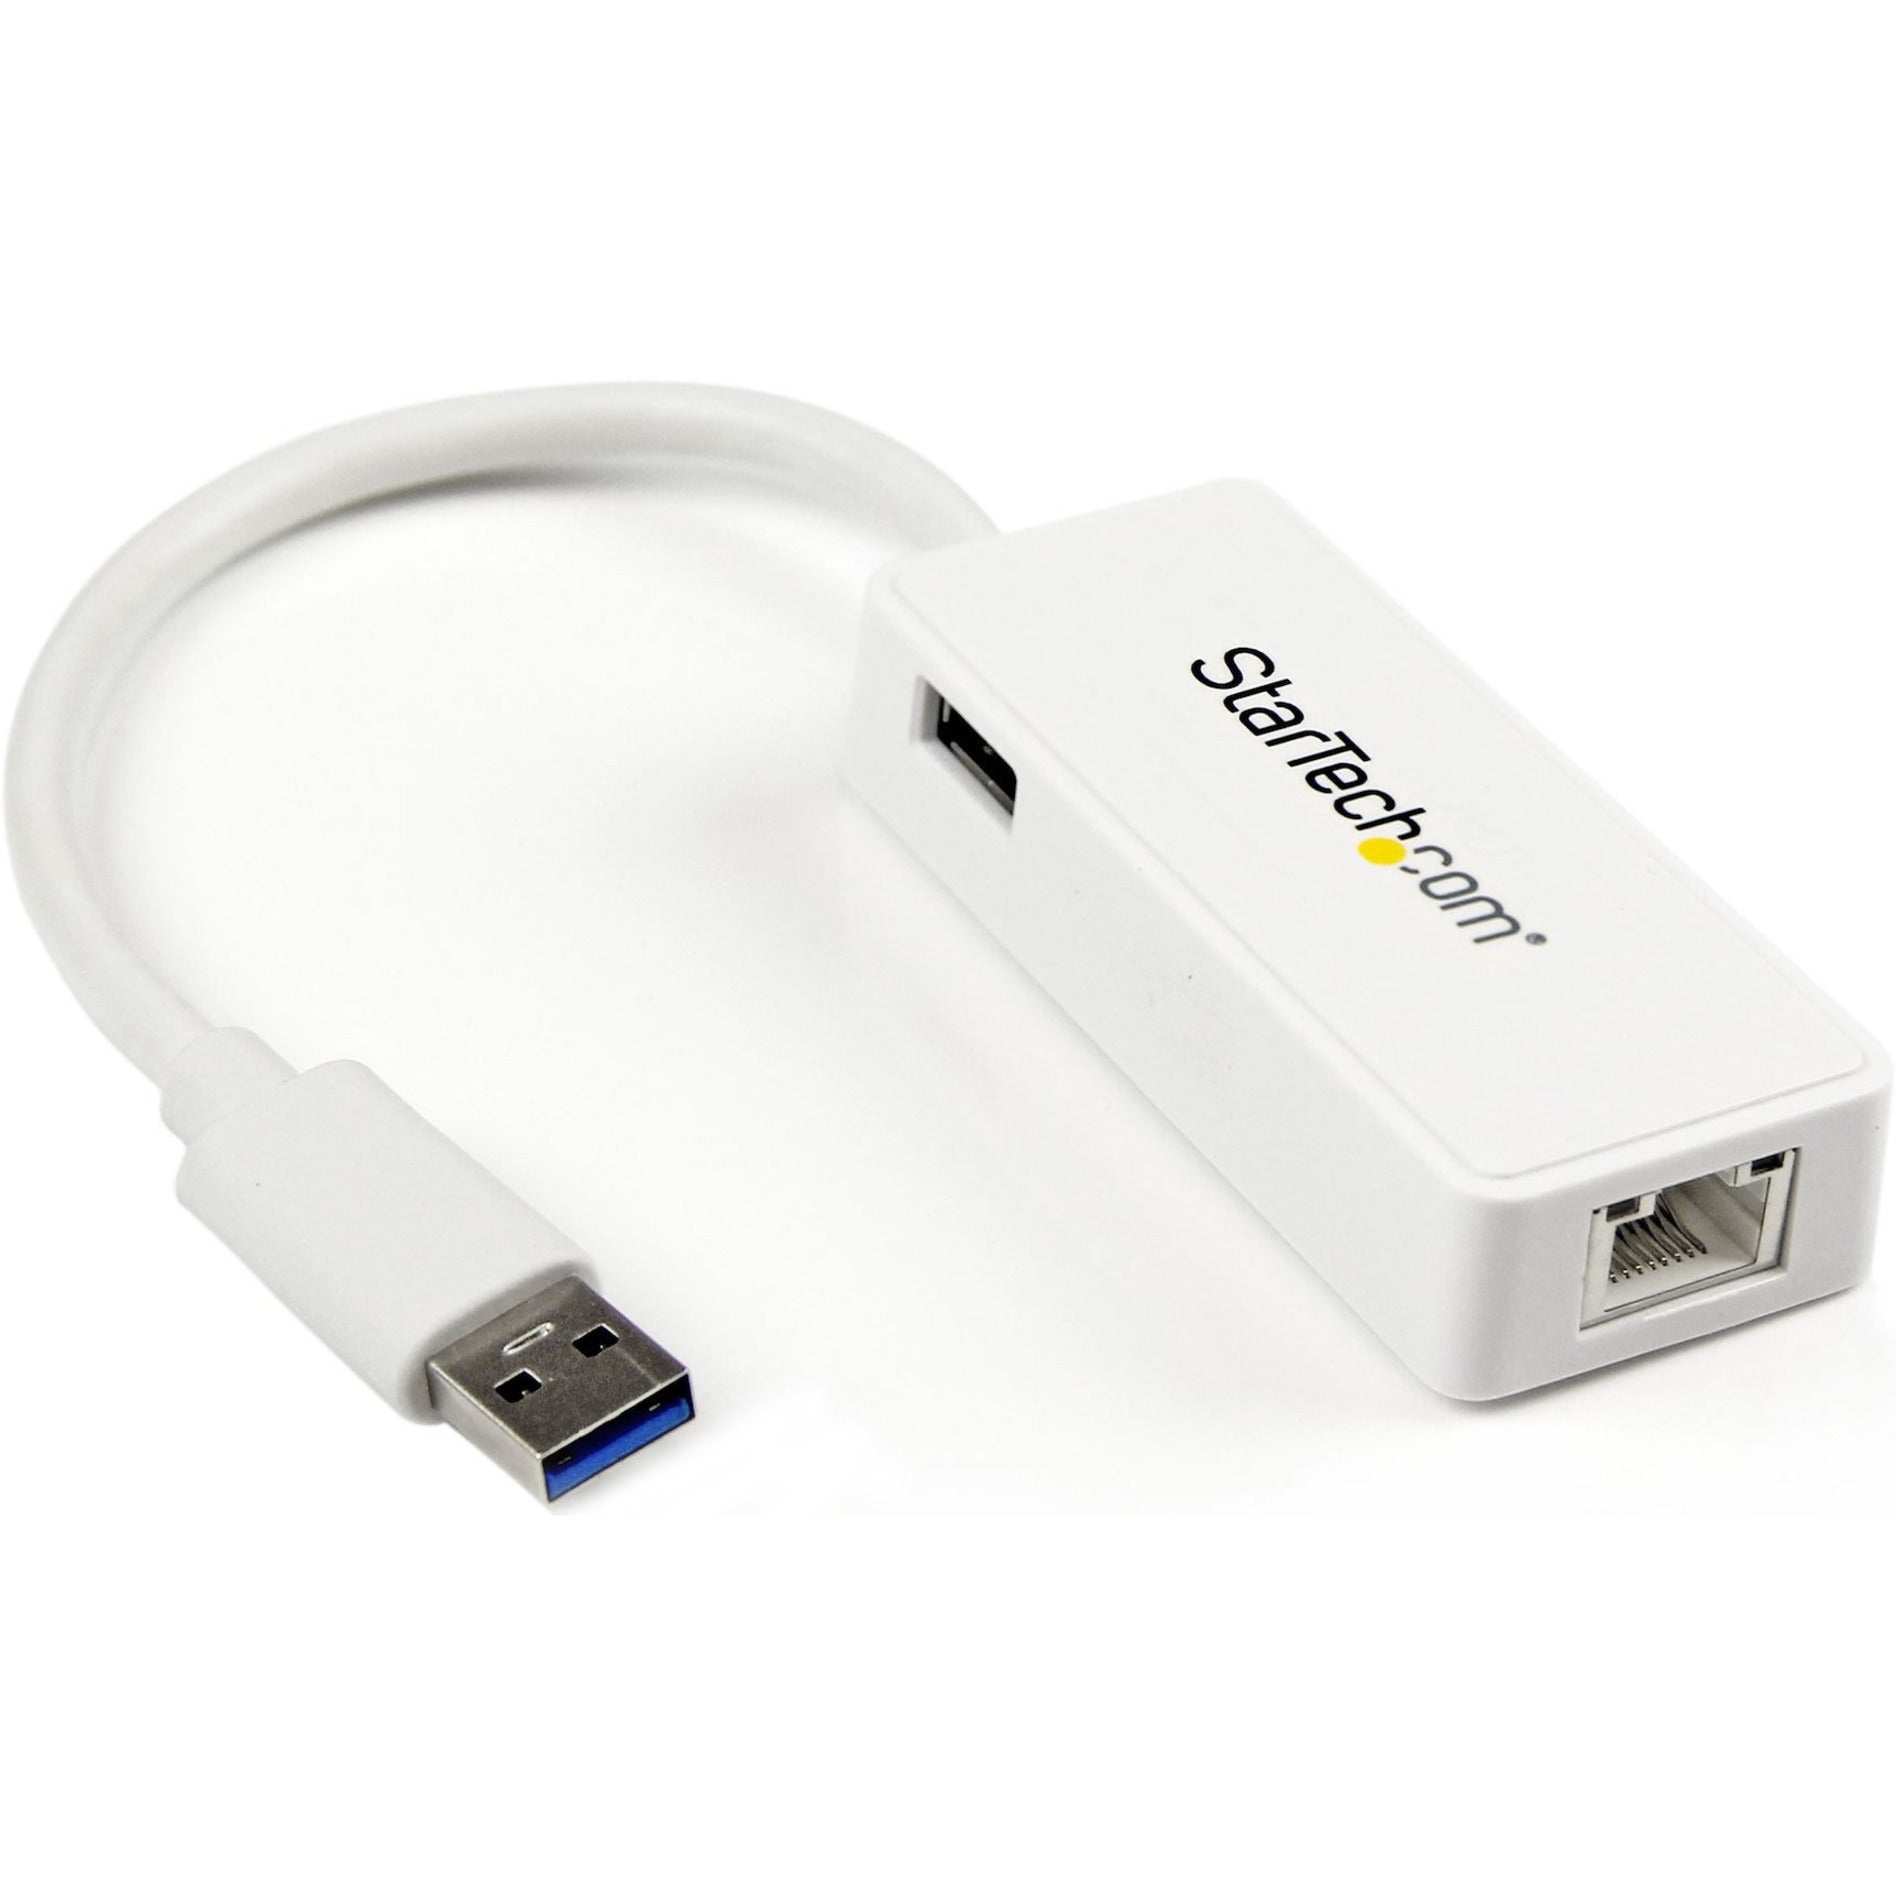 StarTech.com USB31000SPTW USB 3.0 to Gigabit Ethernet Adapter NIC w/ USB Port - White, High-Speed Internet Connection for Notebooks